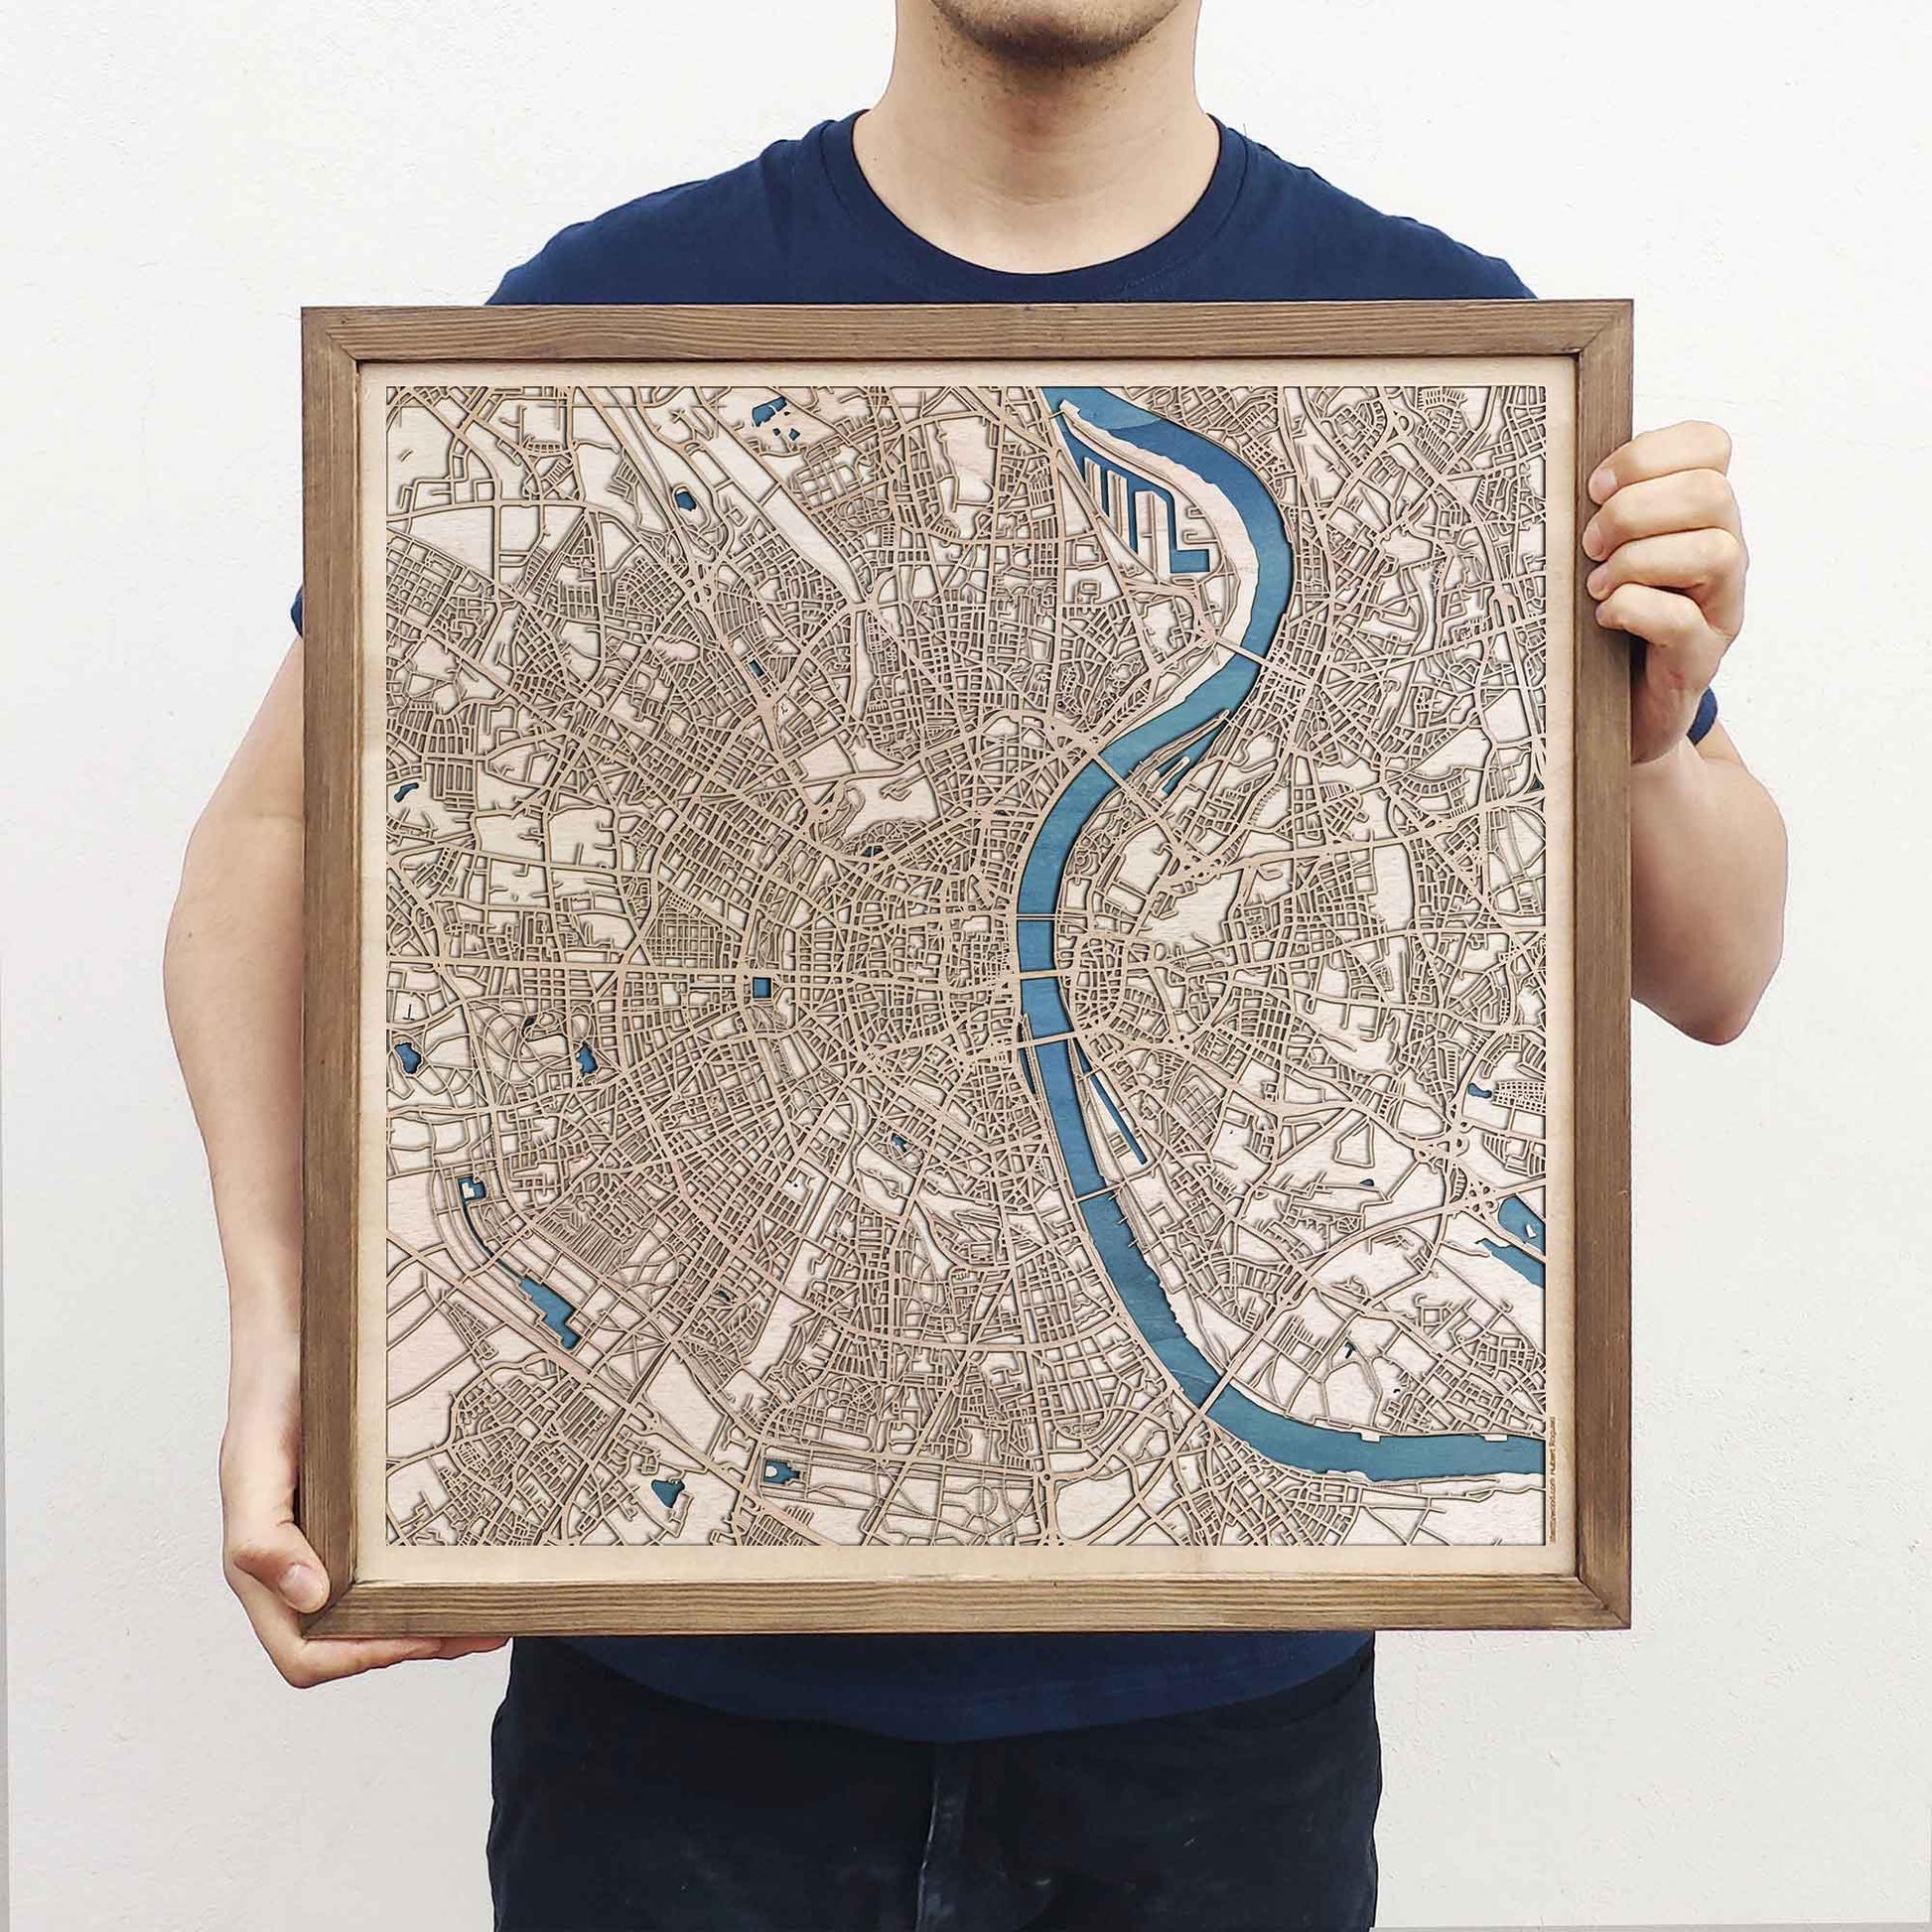 Cologne Wooden Map by CityWood - Custom Wood Map Art - Unique Laser Cut Engraved - Anniversary Gift